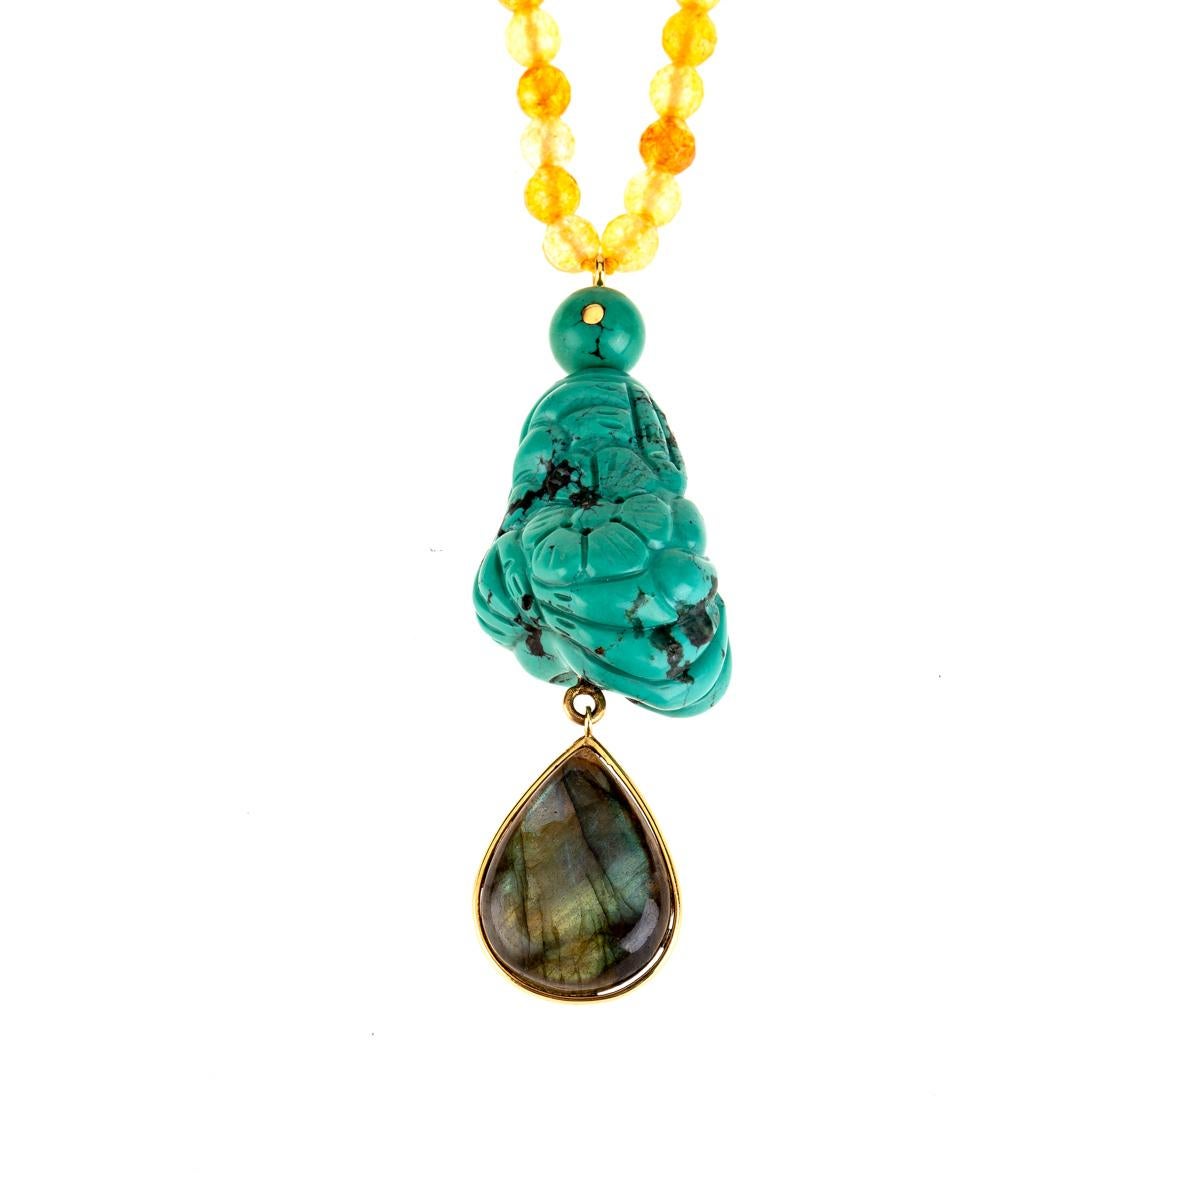 Long citrine necklace with little turquoise turtle and a old carved Chinese turquoise stone, at the end a Labradorite drop. 18 kt Gold gr 5,20.
All Giulia Colussi jewelry is new and has never been previously owned or worn. Each item will arrive at